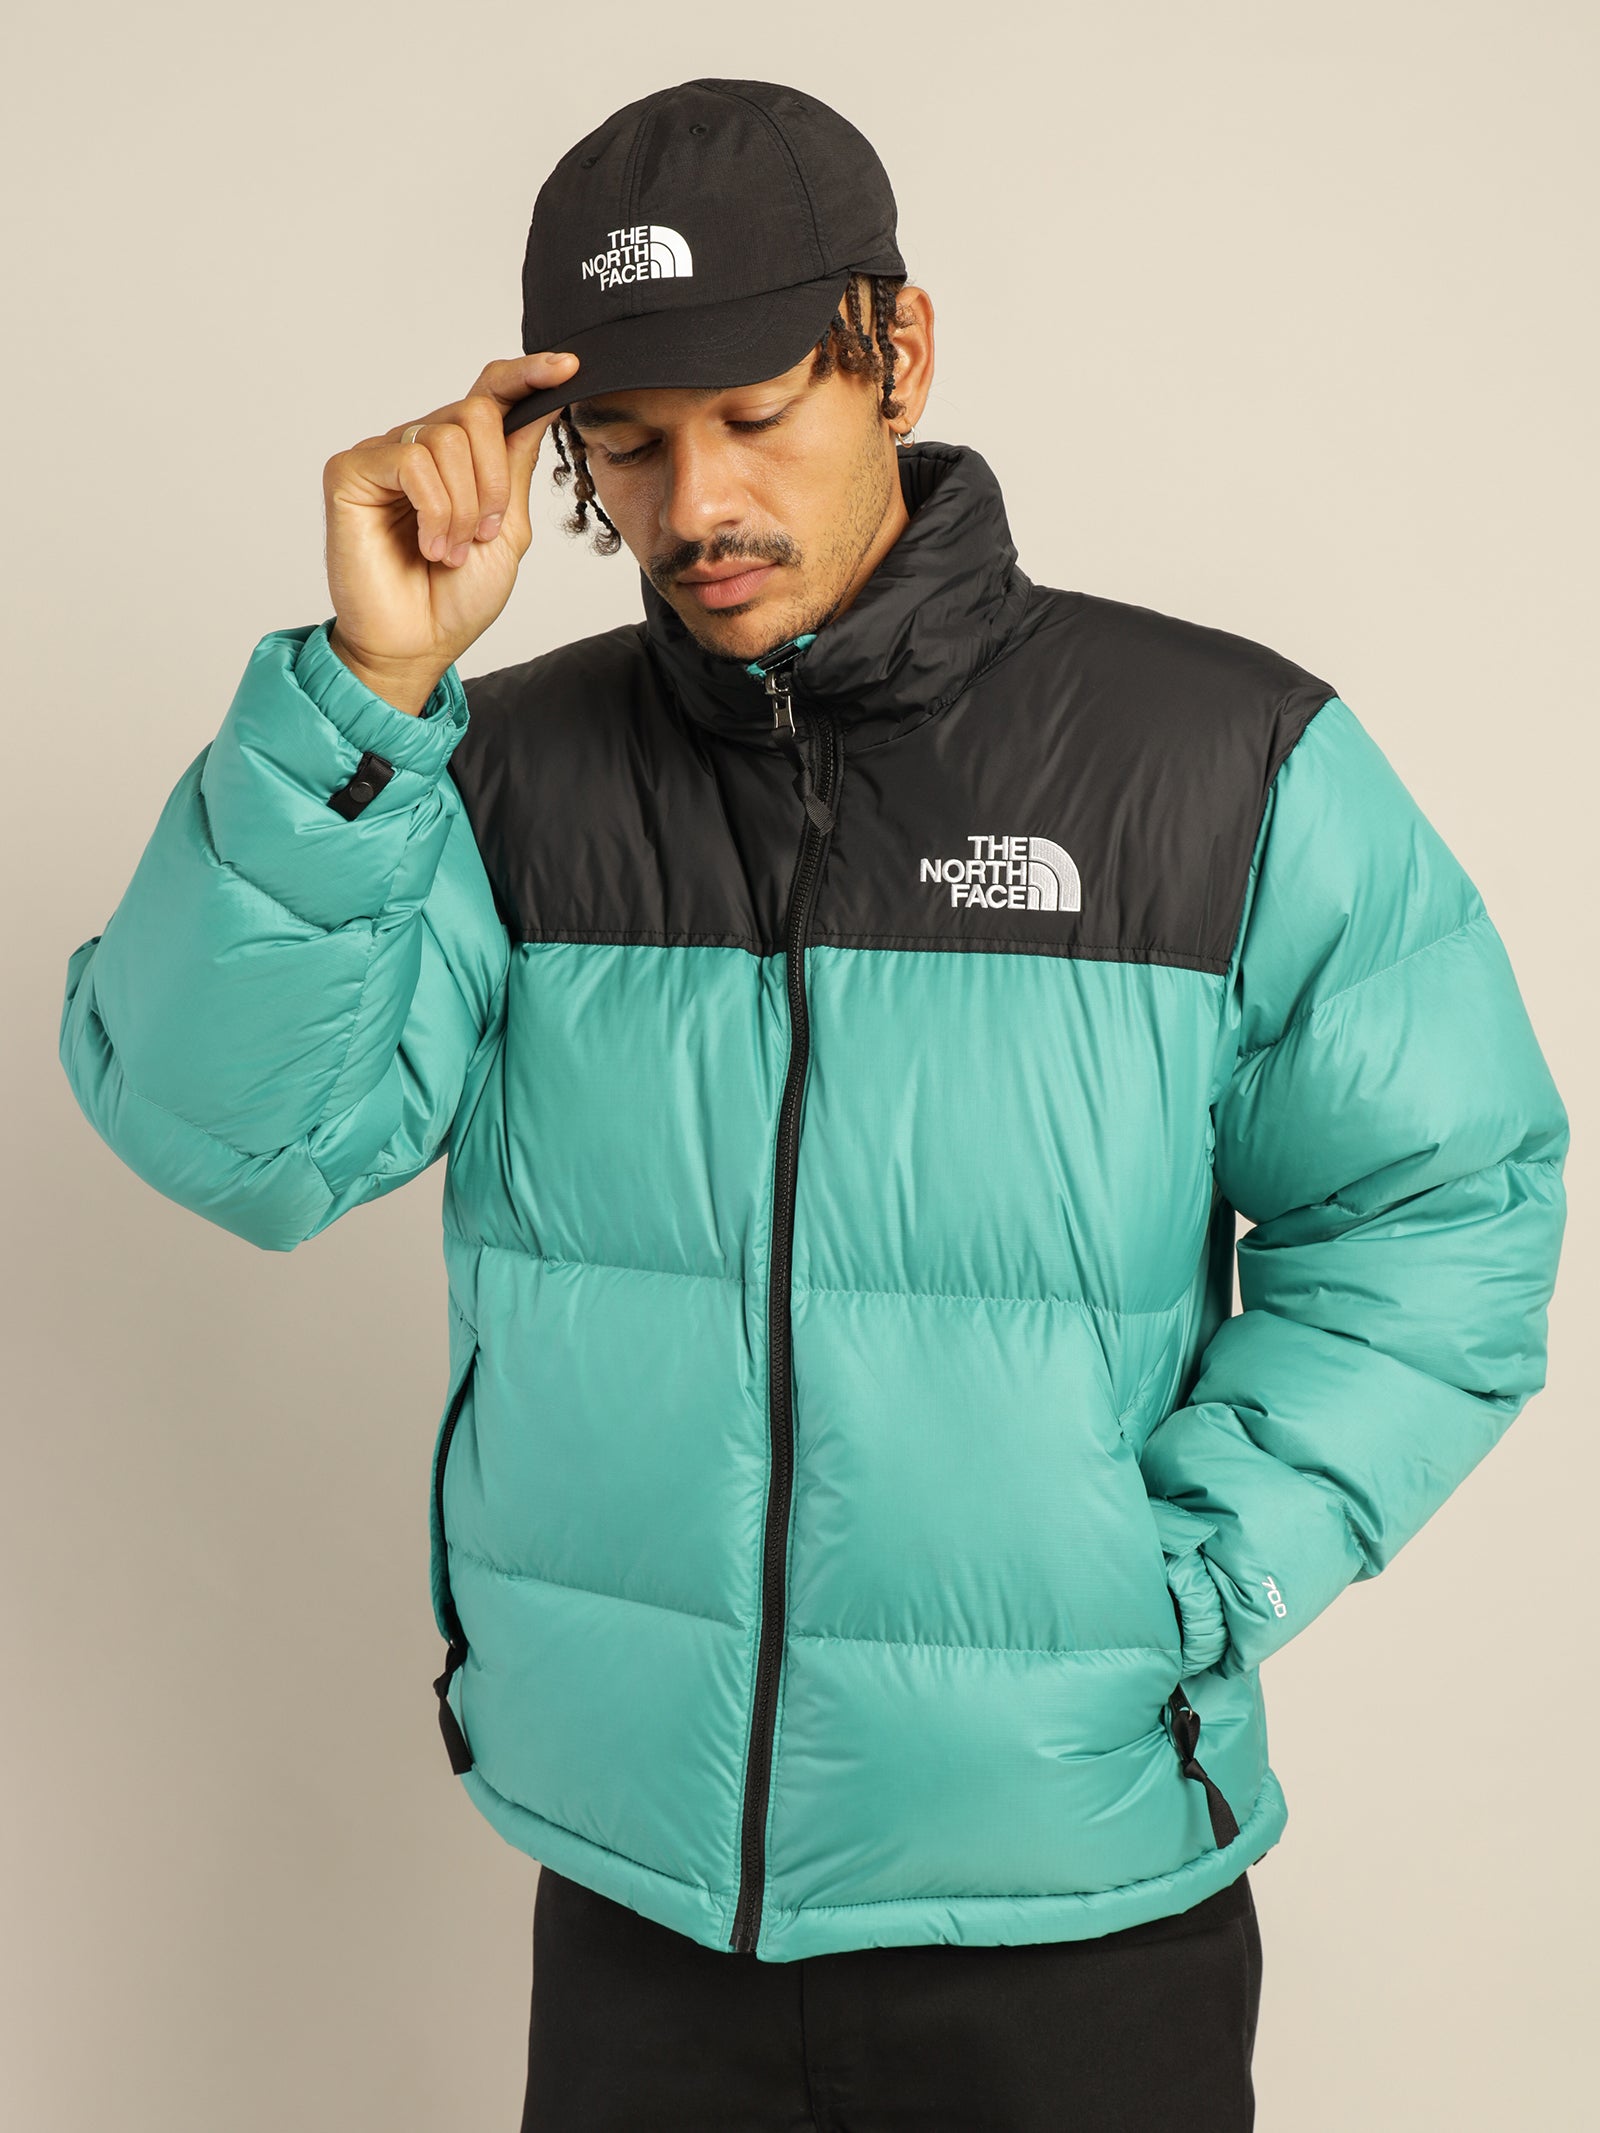 Norse Store  Shipping Worldwide - The North Face HP Nuptse Jacket - Black